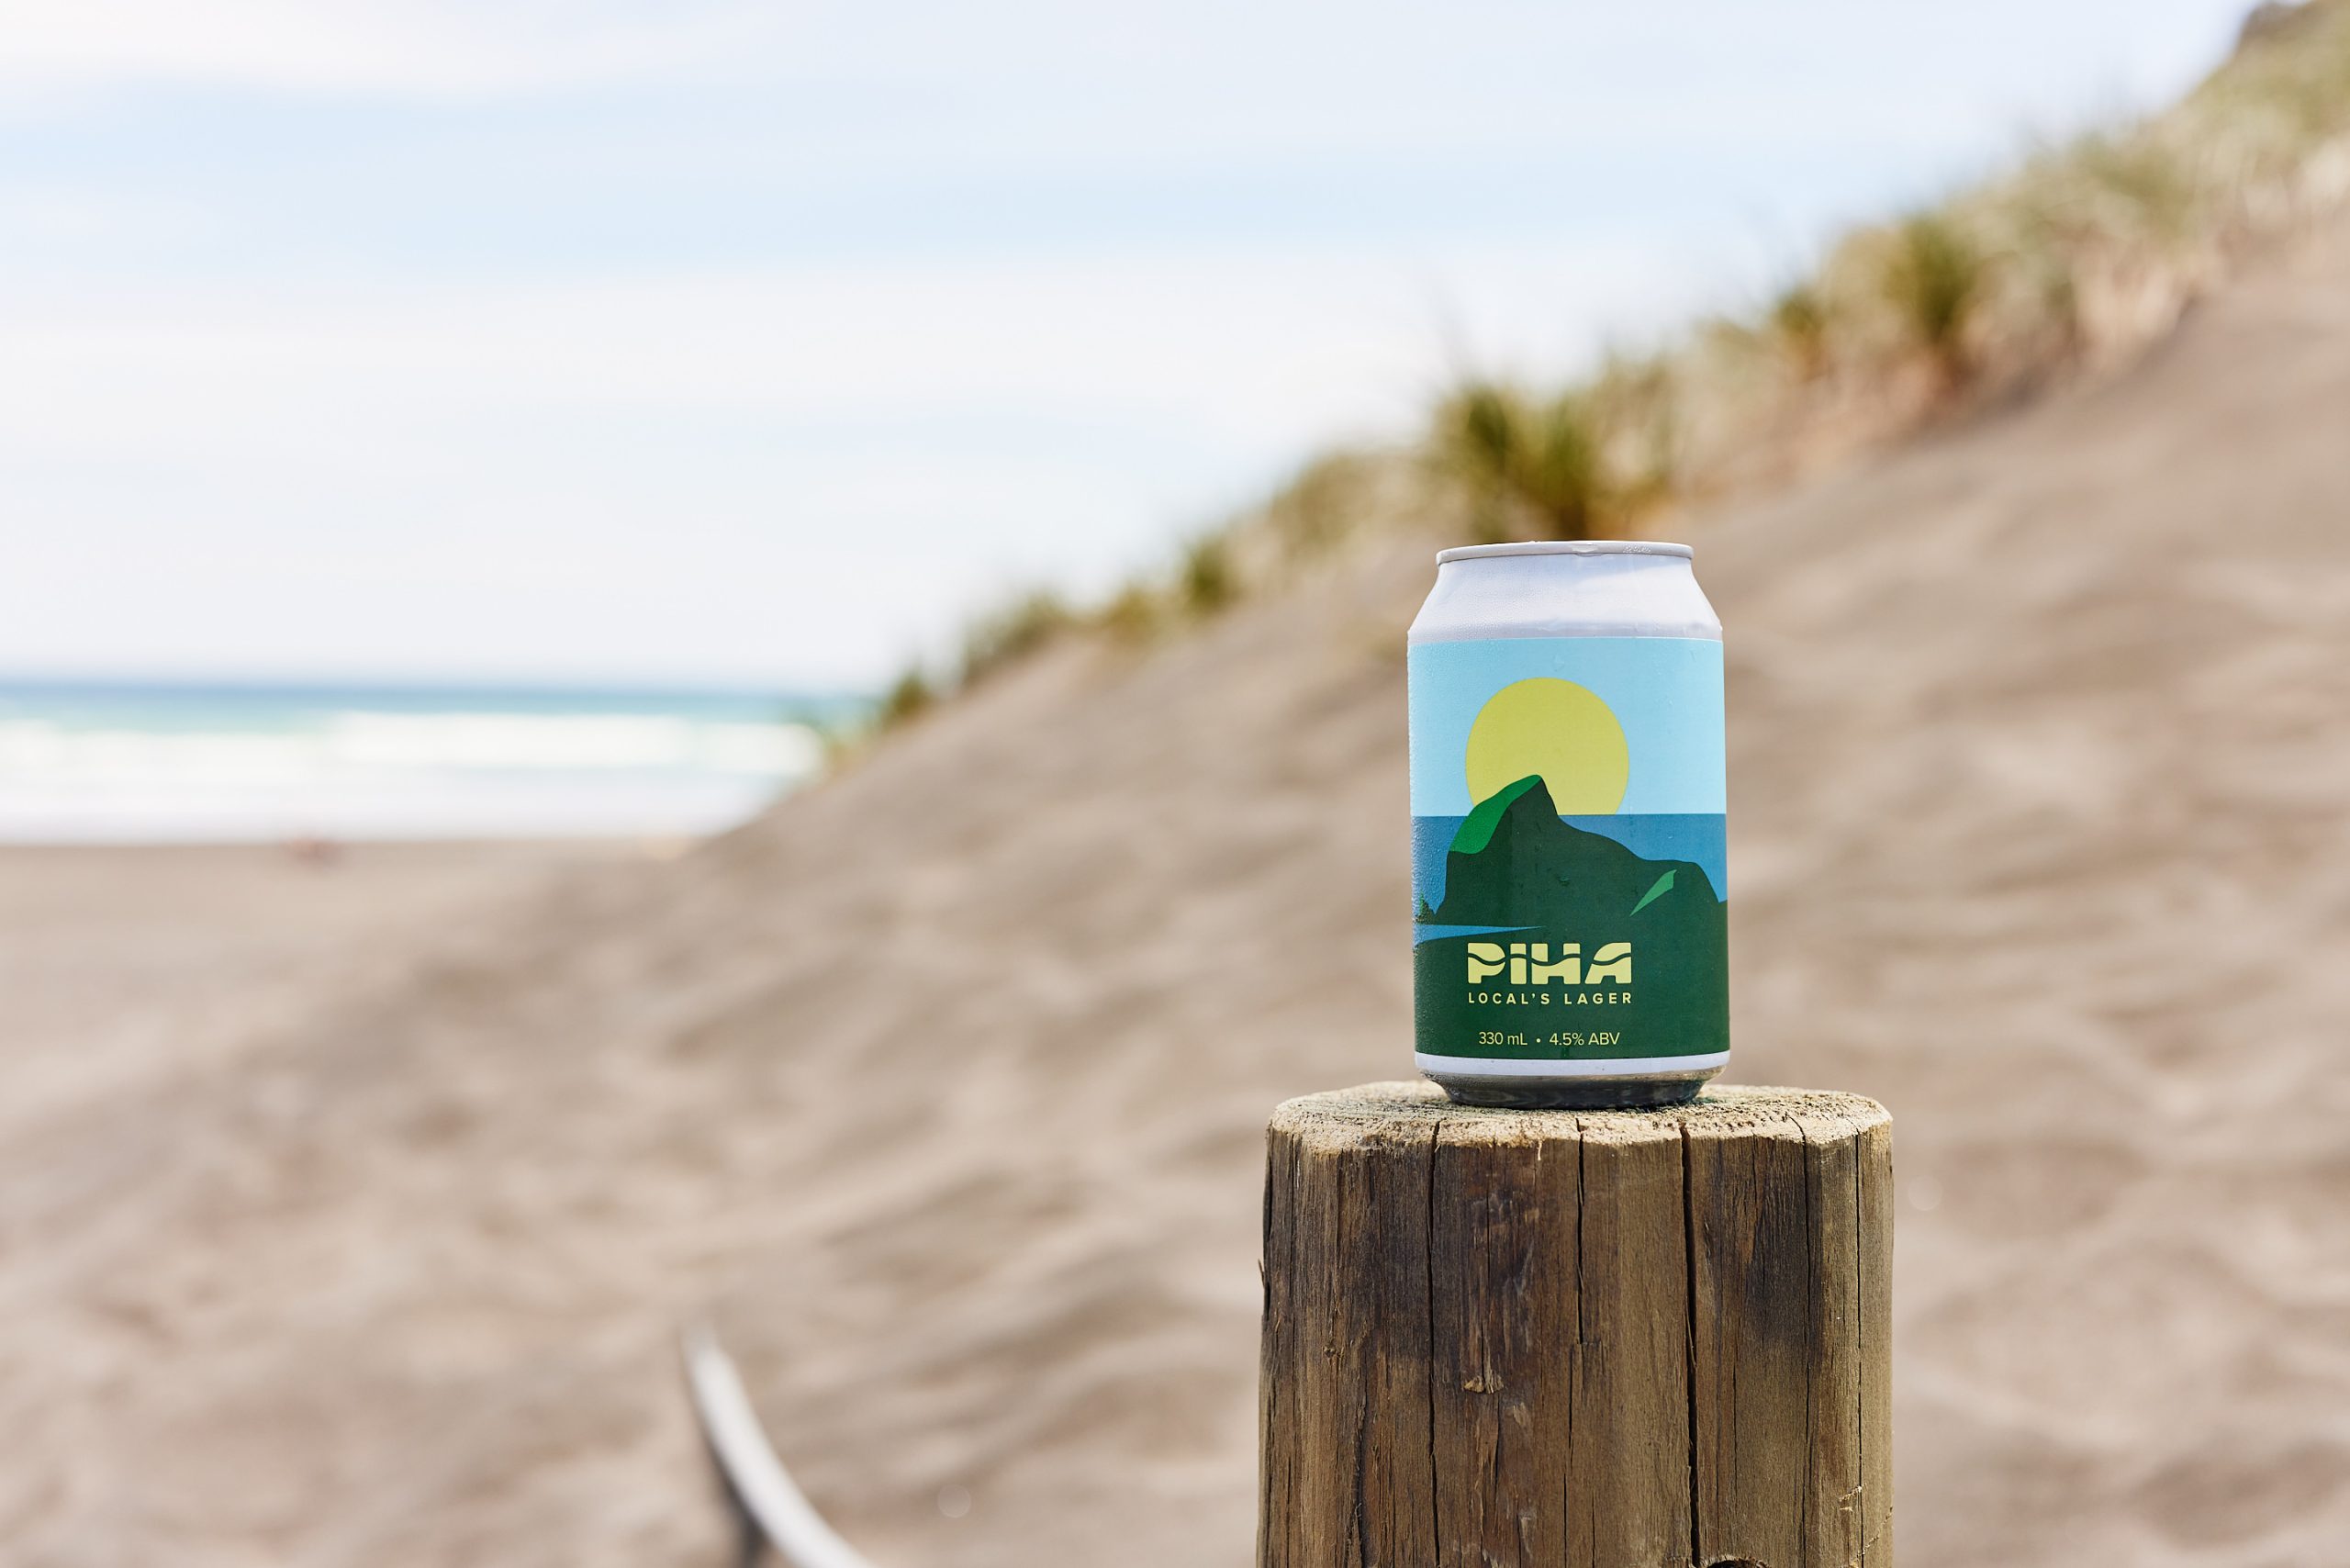 craft beer can against sand dune and sea background